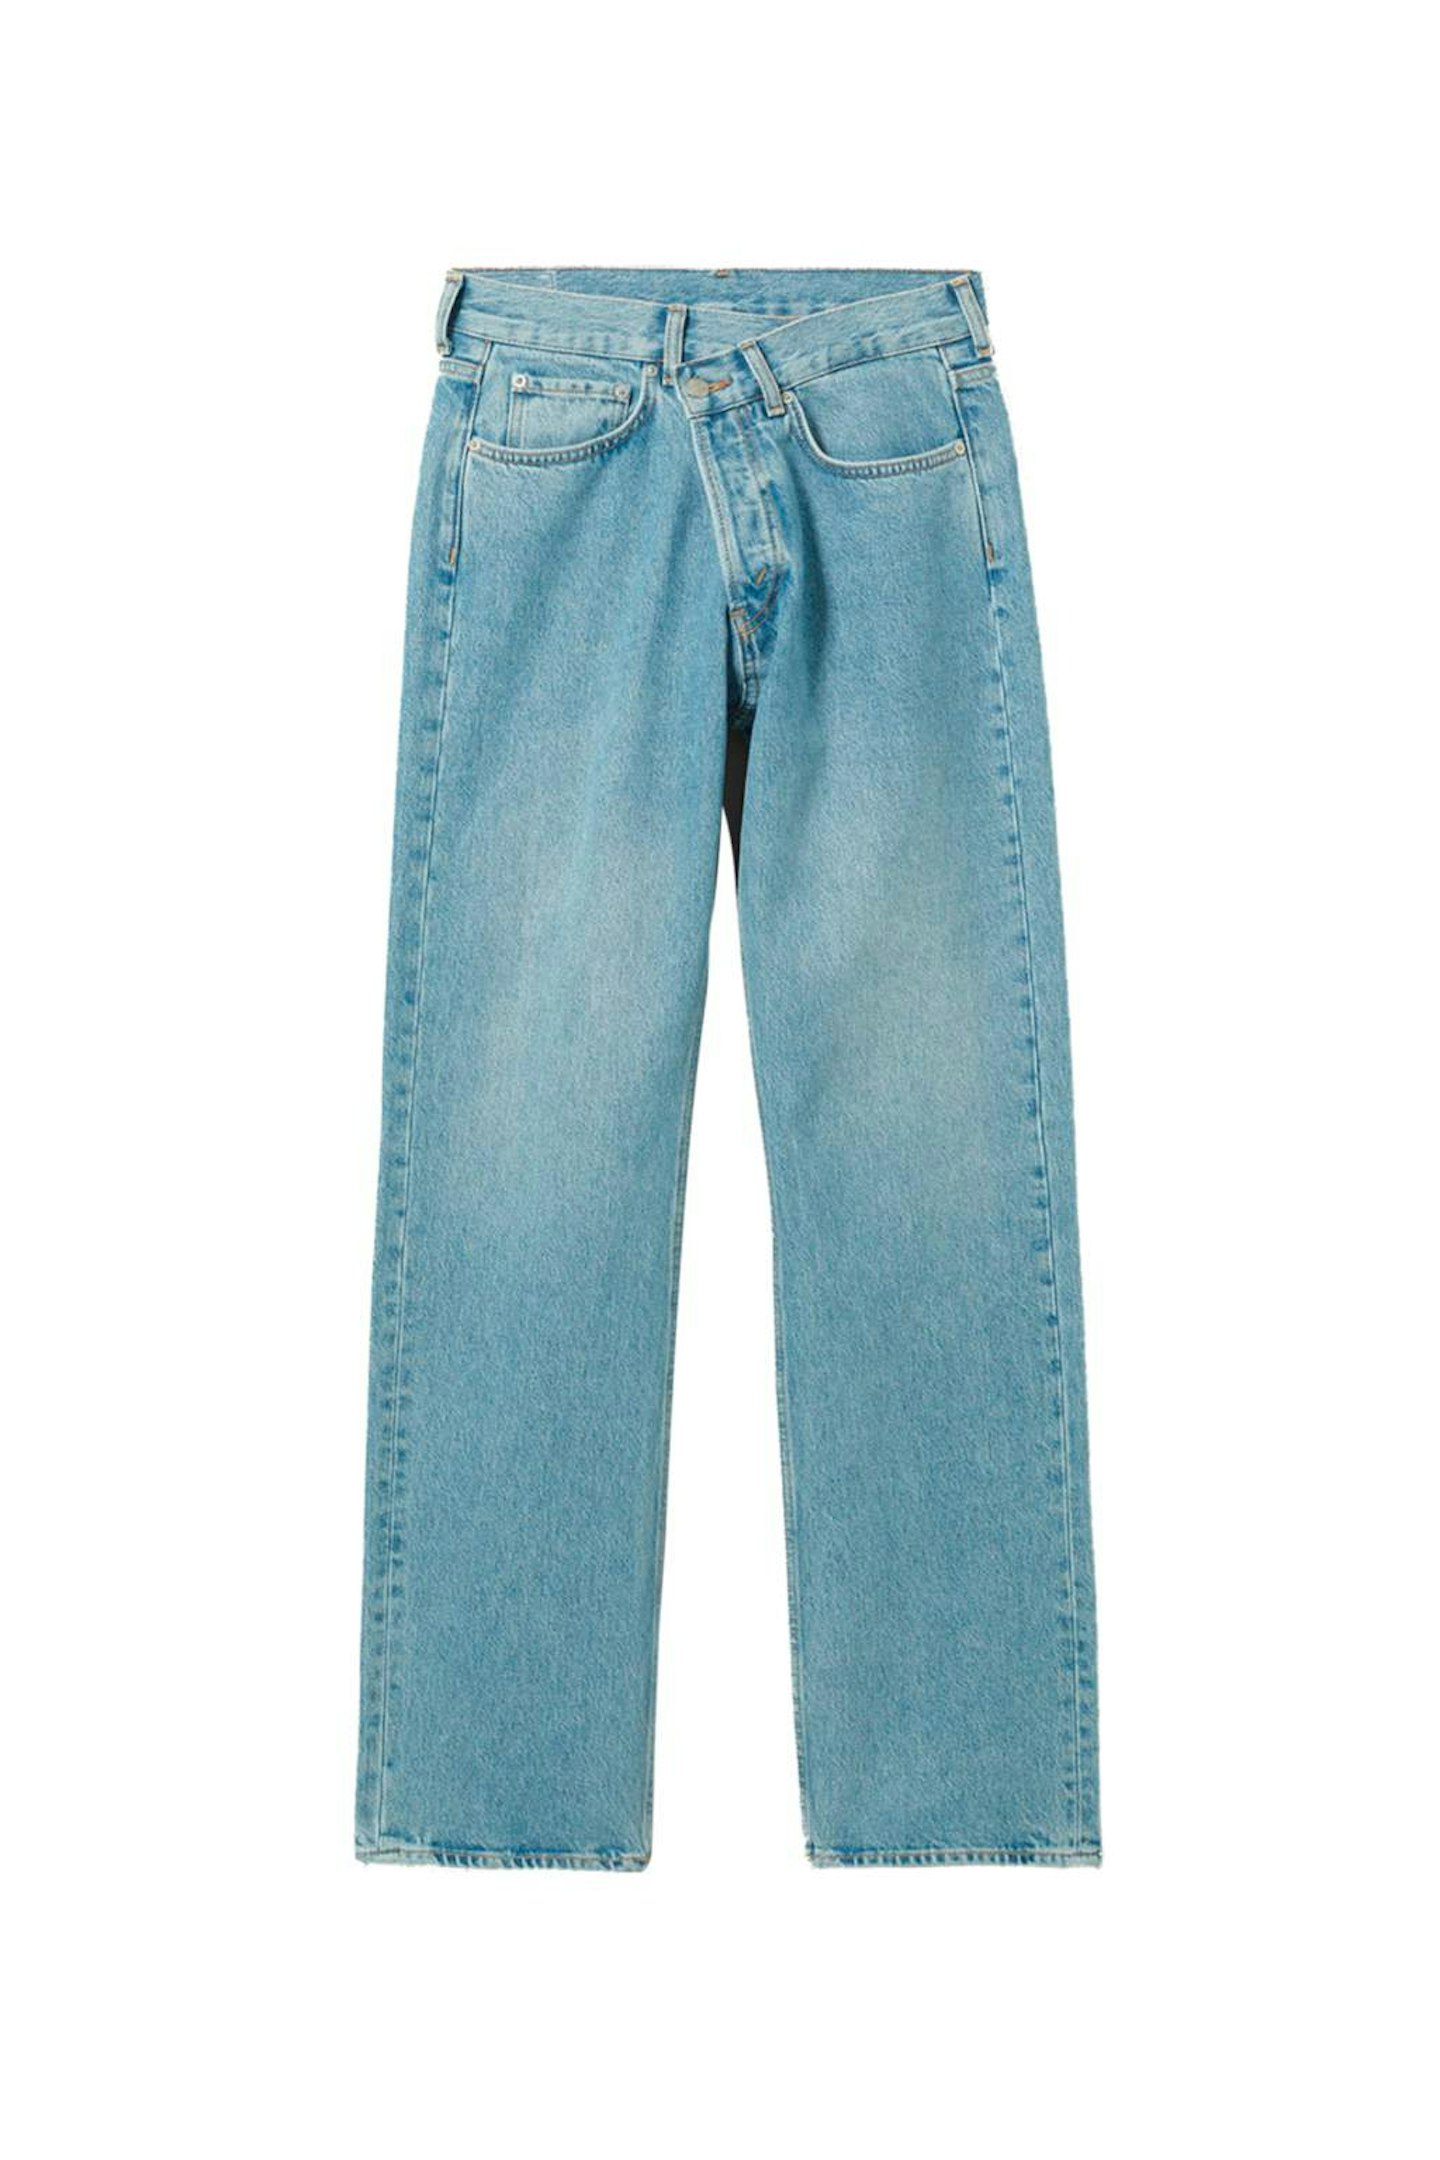 Weekday, Re-Made Washed Blue Jeans, £55